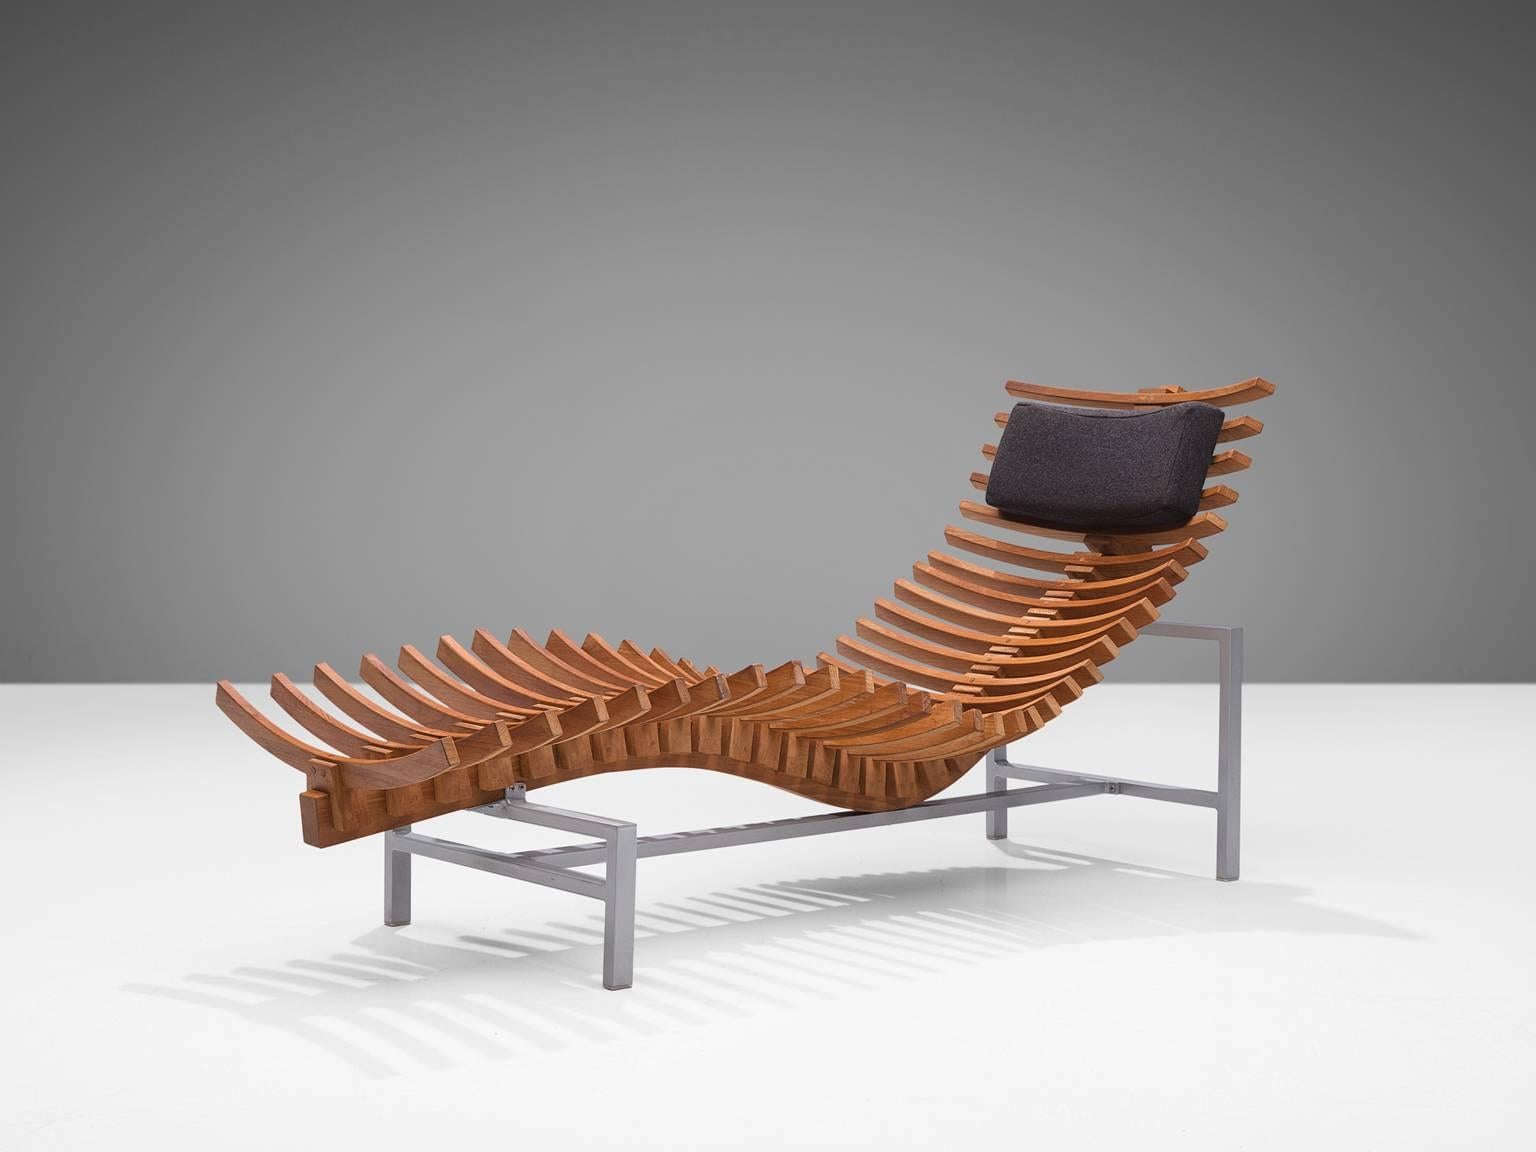 Chaise longue in teak and aluminium, Netherlands, 1980s. 

Exceptional Dutch chaise longue. The seating of this chaise consists of teak slats that are formed in order to support the body. They are arranged to form a skeleton, with a backbone on